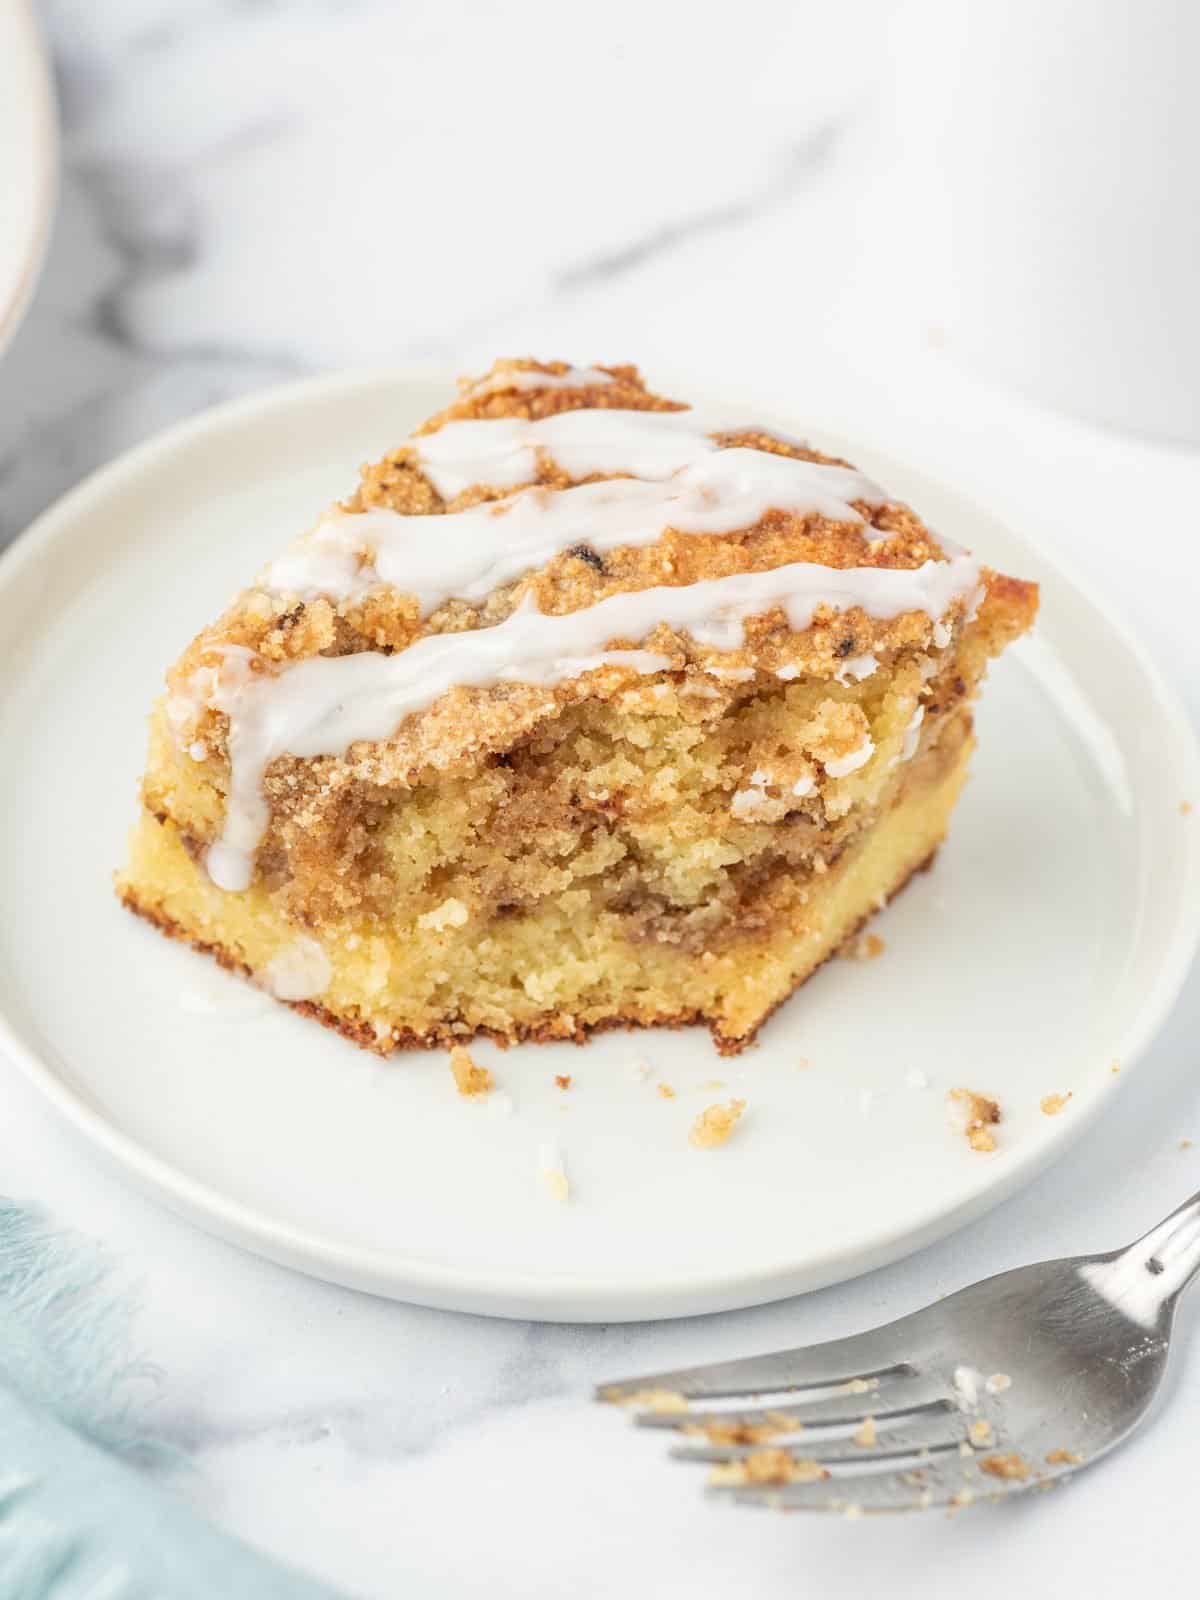 A piece of low carb coffee cake with a bite missing sits on a white plate with a few crumbs. A fork with crumbs sits to the side.